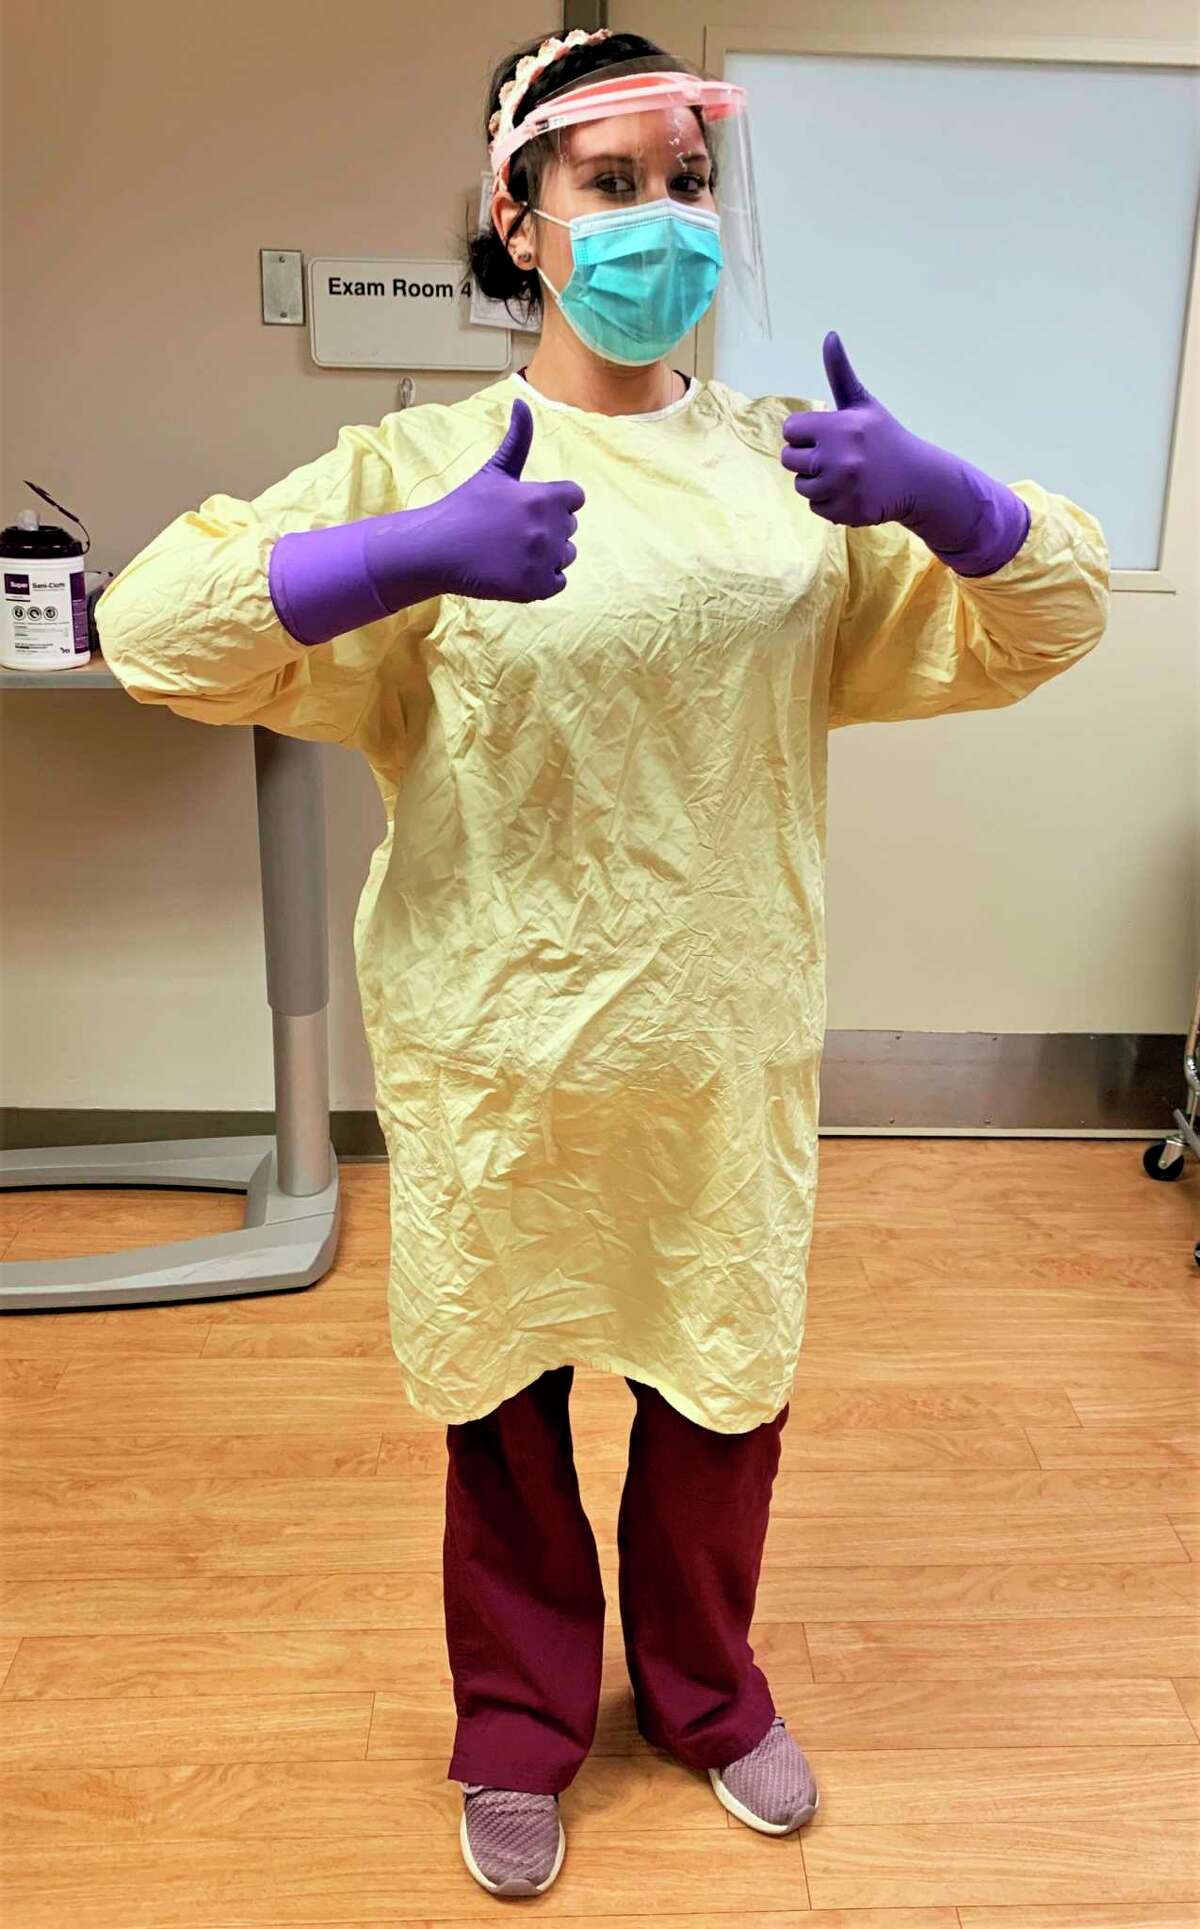 Reed City resident Alicia Zeigler is a part-time nurse technician and college student studying to become a nurse. During this global pandemic, Zeigler said she feels fortunate to be able to help at this time. (Courtesy photo)